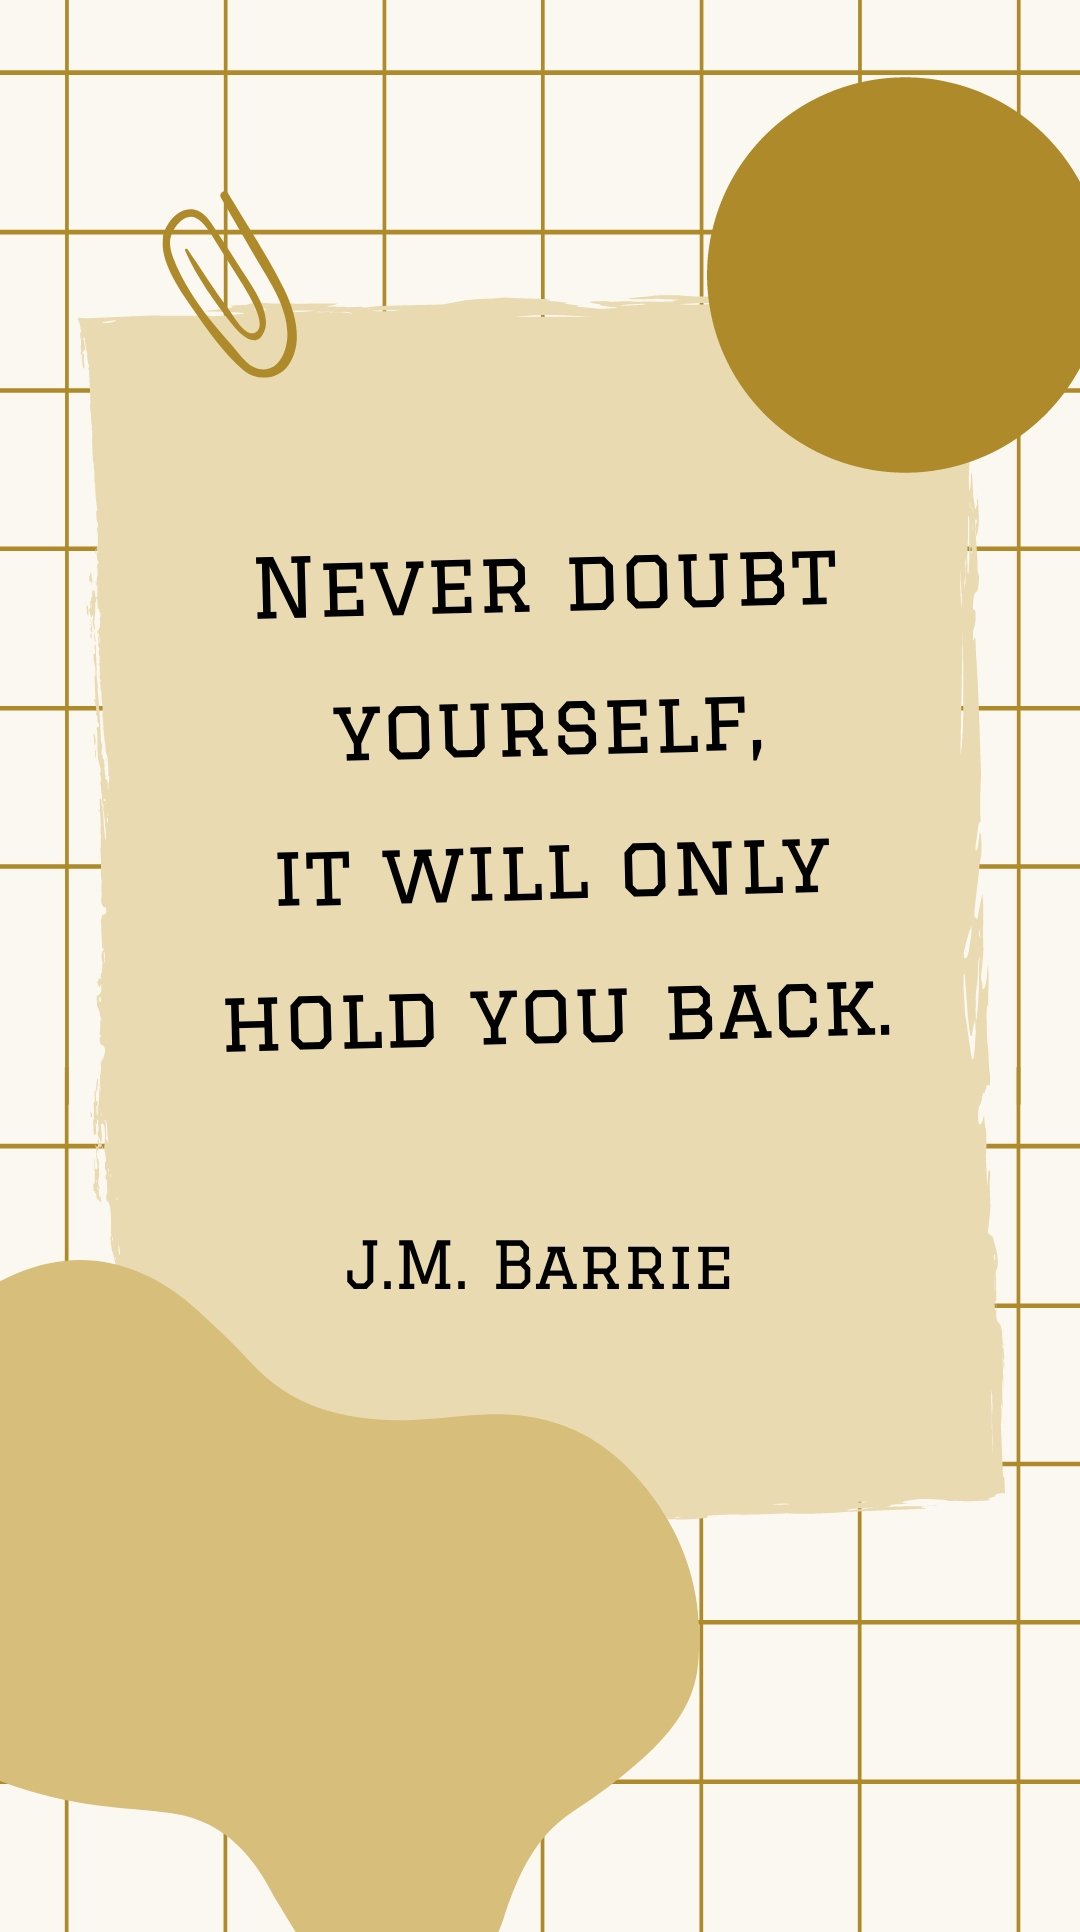 J.M. Barrie - Never doubt yourself, it will only hold you back.